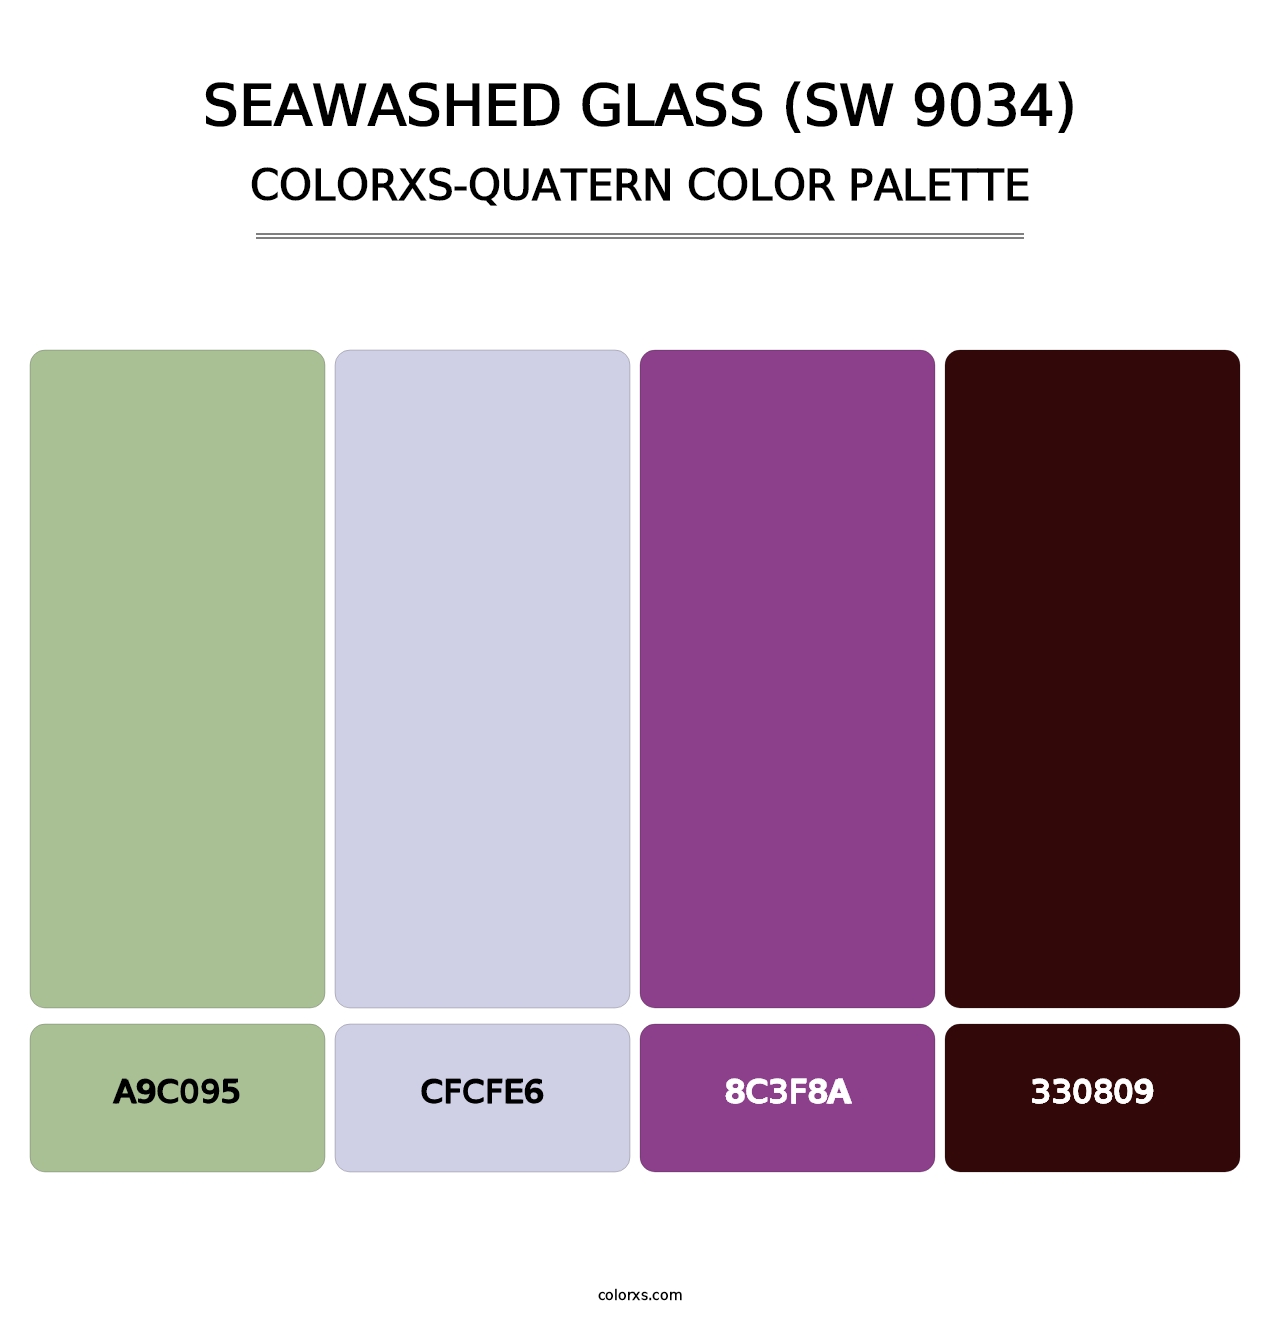 Seawashed Glass (SW 9034) - Colorxs Quatern Palette